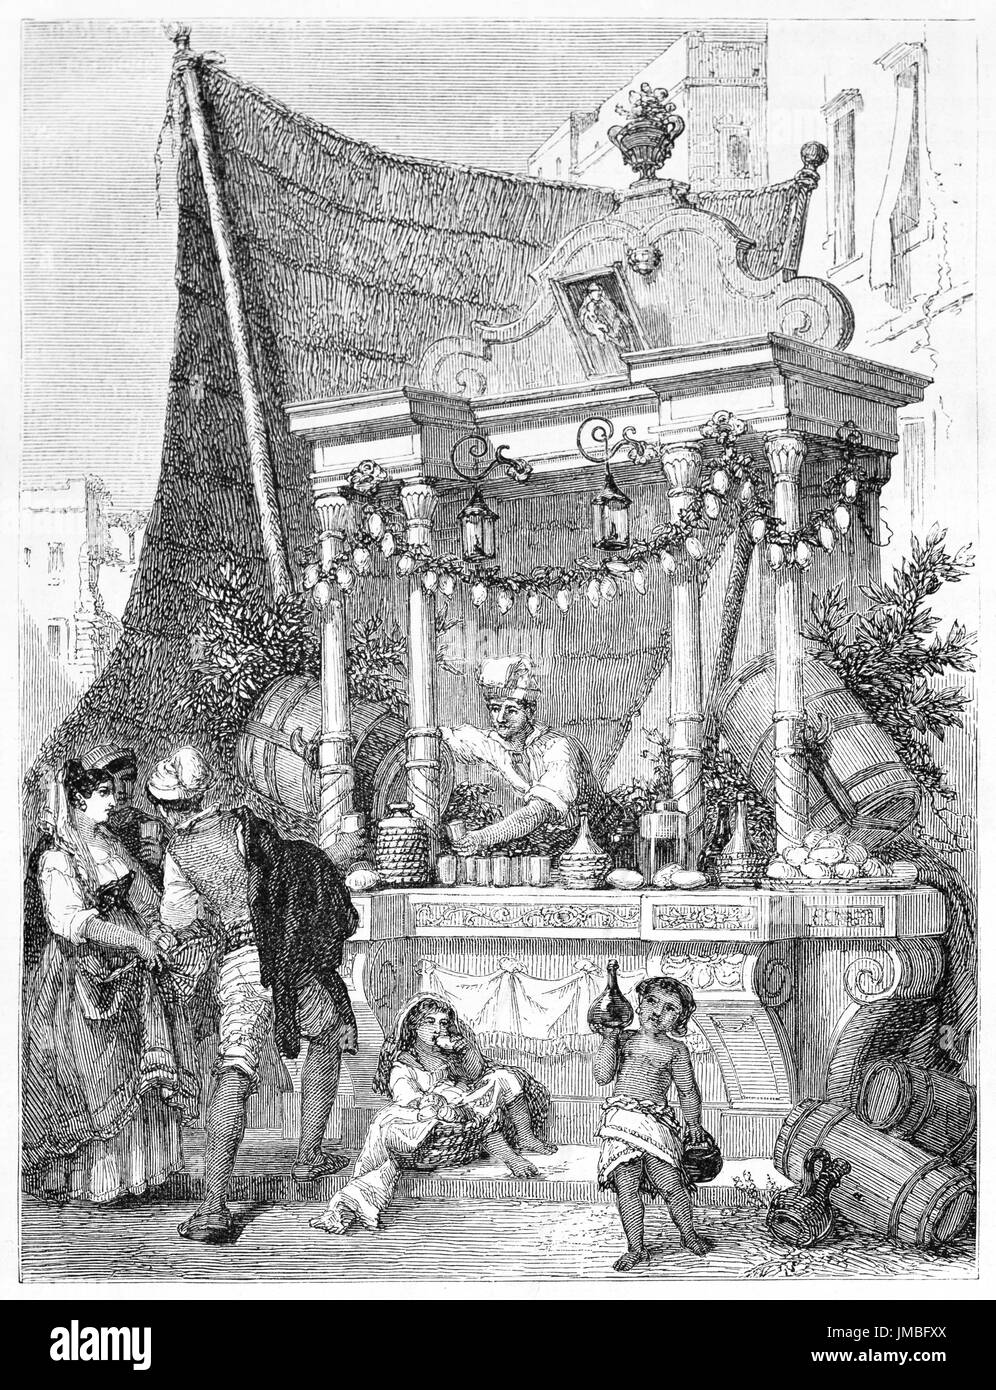 Neapolitan lemon water seller richly decorated kiosk outdoor in the city streets. Etching style art by Ferogio, Le Tour du Monde, 1861 Stock Photo